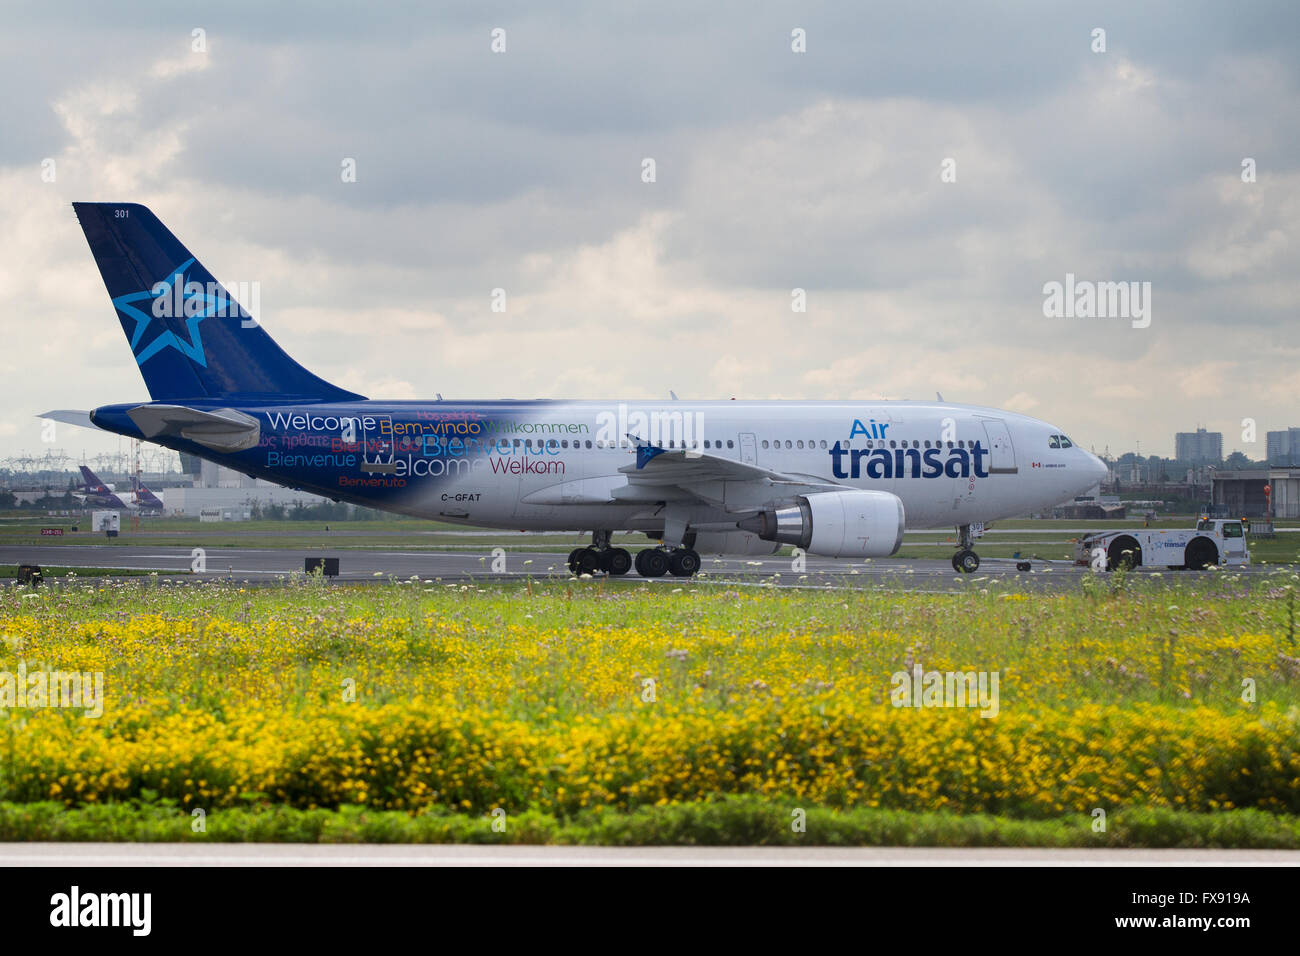 An Air Transat airplane is moved on the tarmac at Pearson International airport in Toronto, Ont., on Tuesday July 14, 2015. Stock Photo